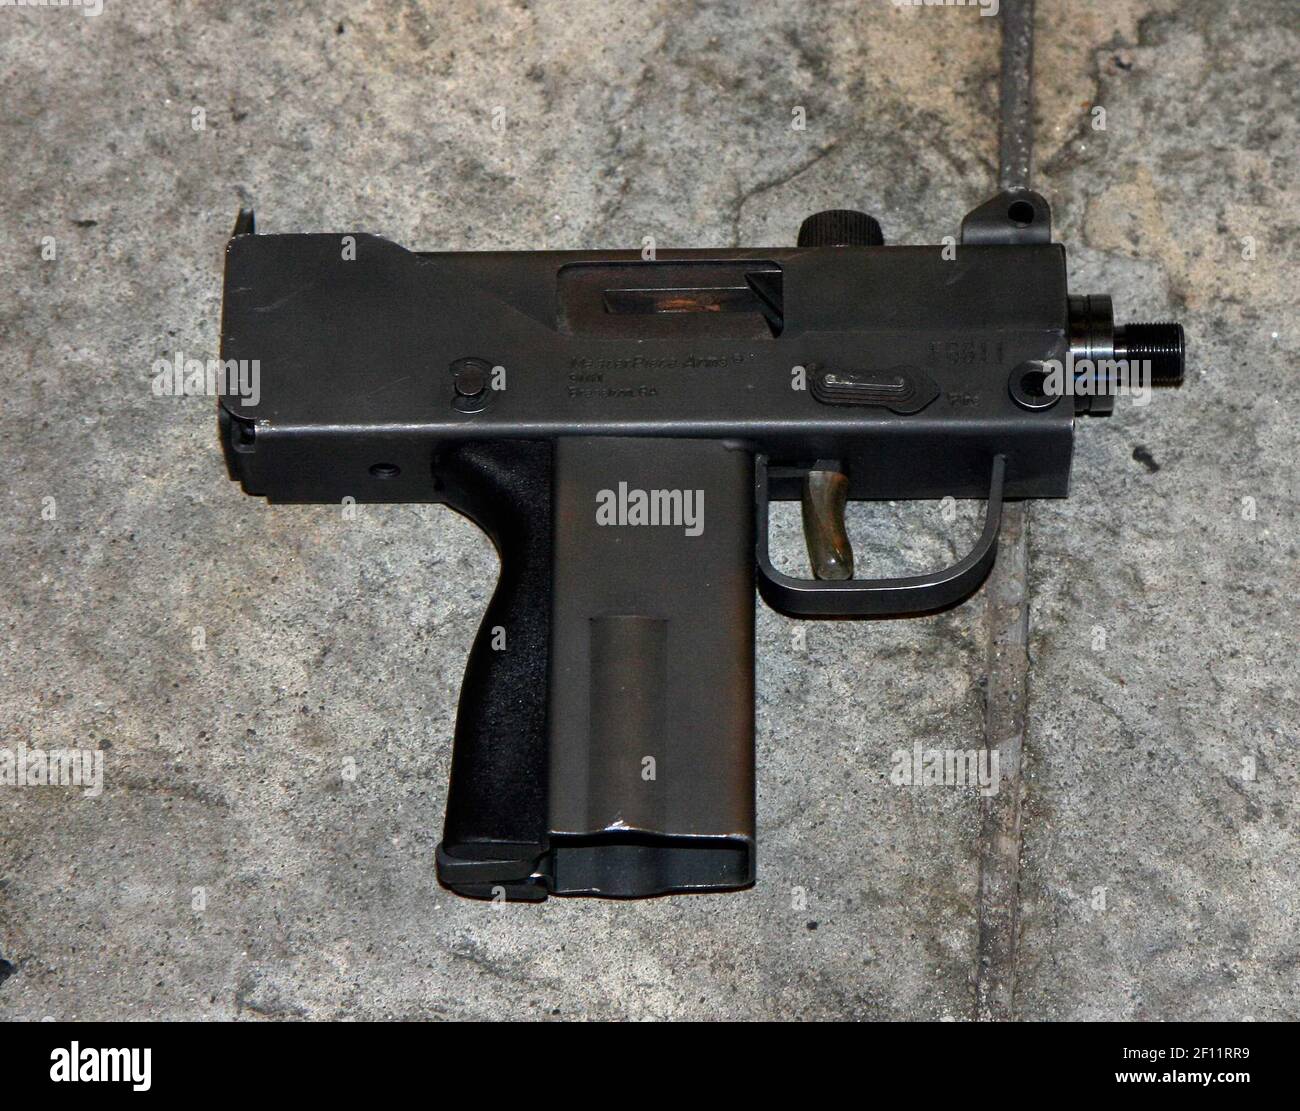 10 December 2009 - Mac-10 machine pistol used by suspect seen here in a handout from the NYPD. Two males illegally selling CD's in the vicinity of Times Square were approached by two NYPD officers. One man fled and the other fired a Mac-10 machine pistol at officers who returned fire killing the suspect. Photo Credit: Sipa Press/0912111821 Stock Photo